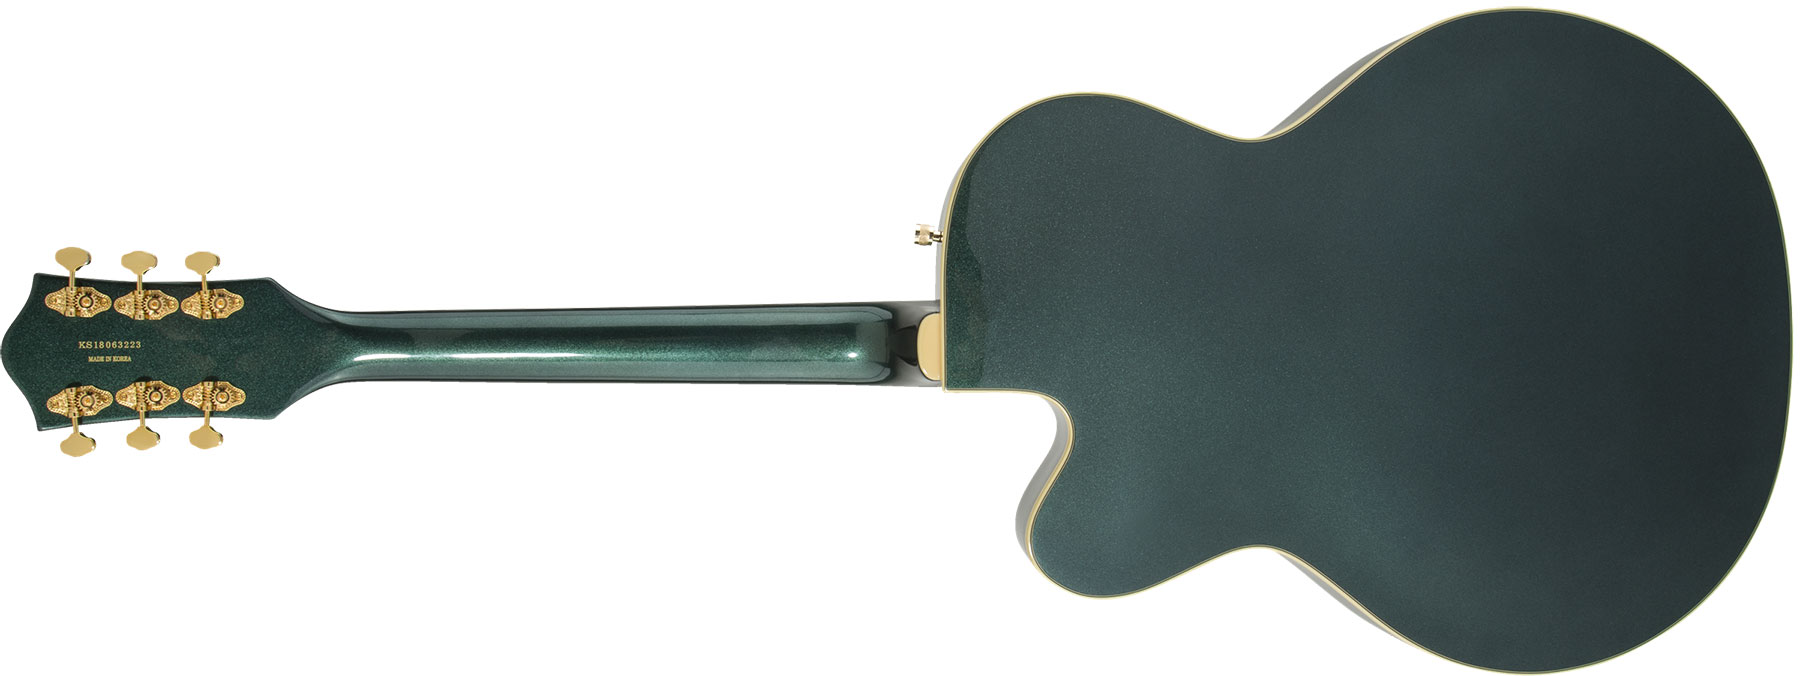 Gretsch G5420tg Electromatic Hollow Body Ltd Bigsby Rw - Cadillac Green - Guitare Électrique 3/4 Caisse & Jazz - Variation 1